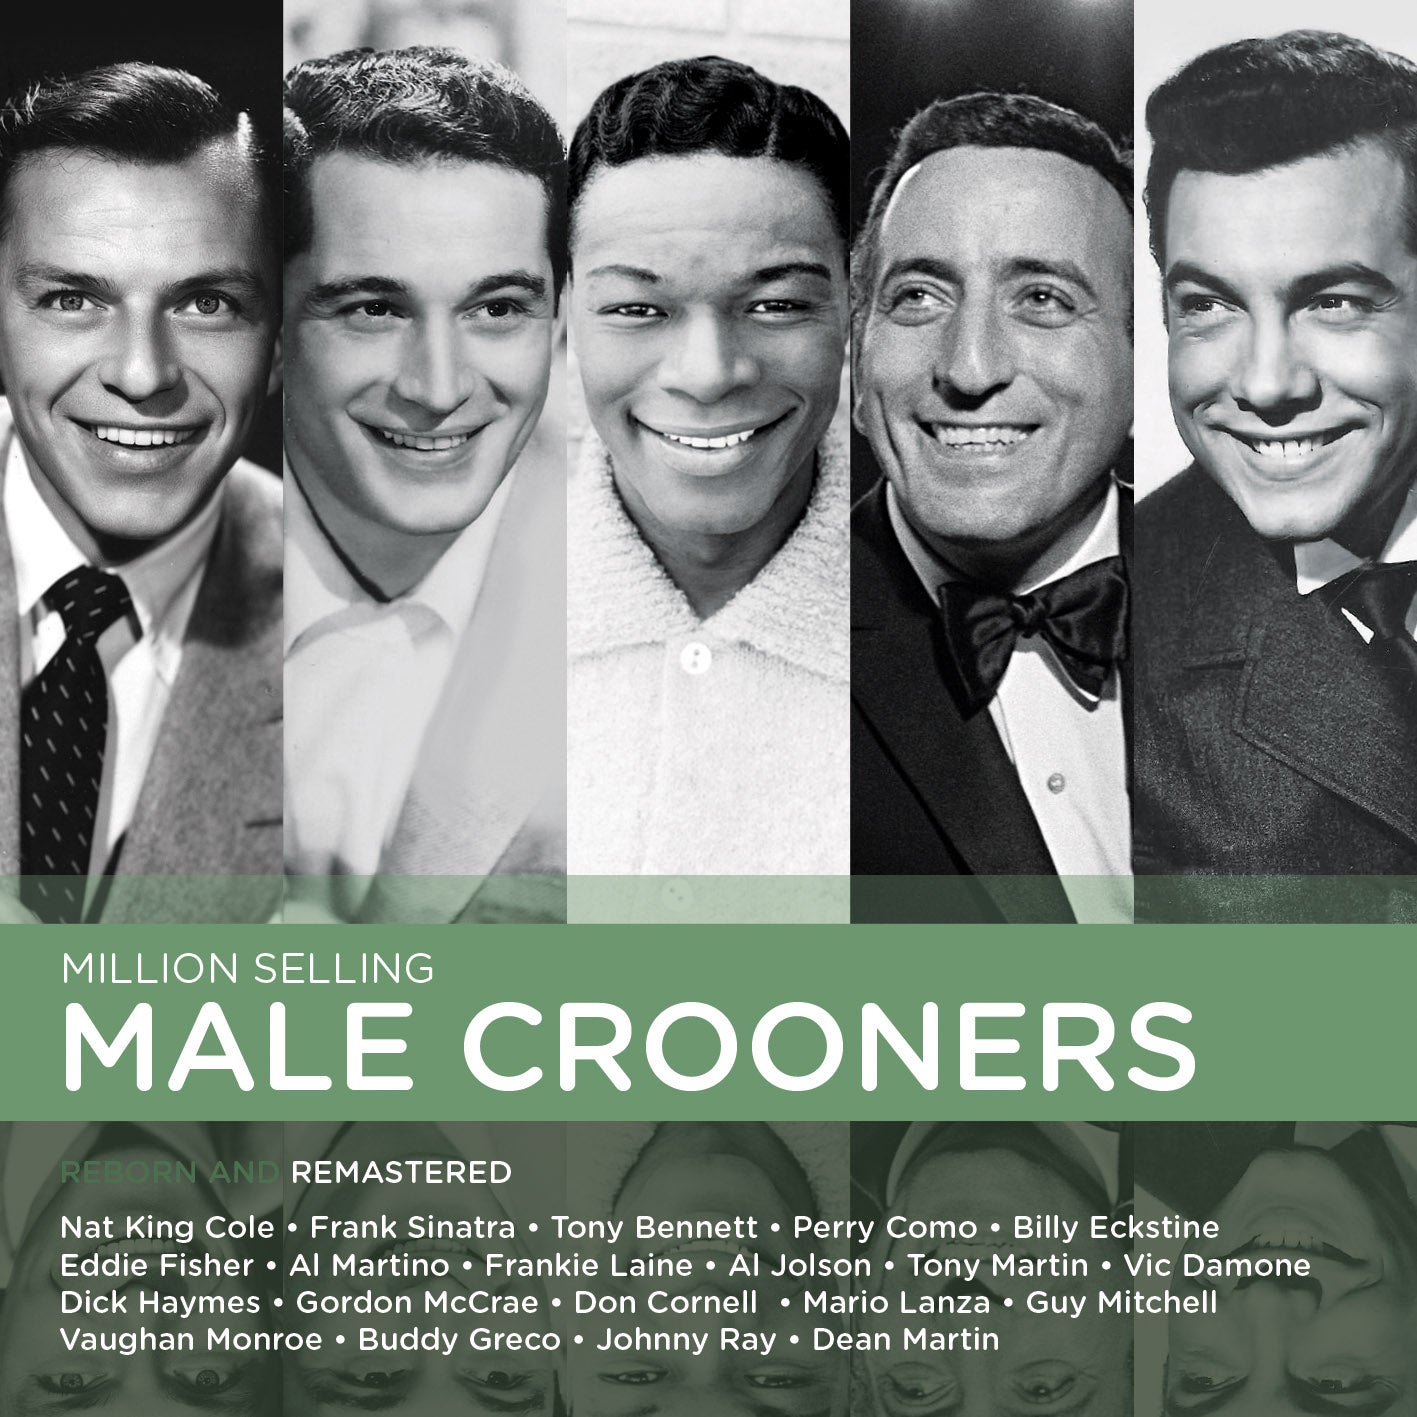 VARIOUS ARTISTS - HALL OF FAME: MILLION SELLING MALE CROONERS